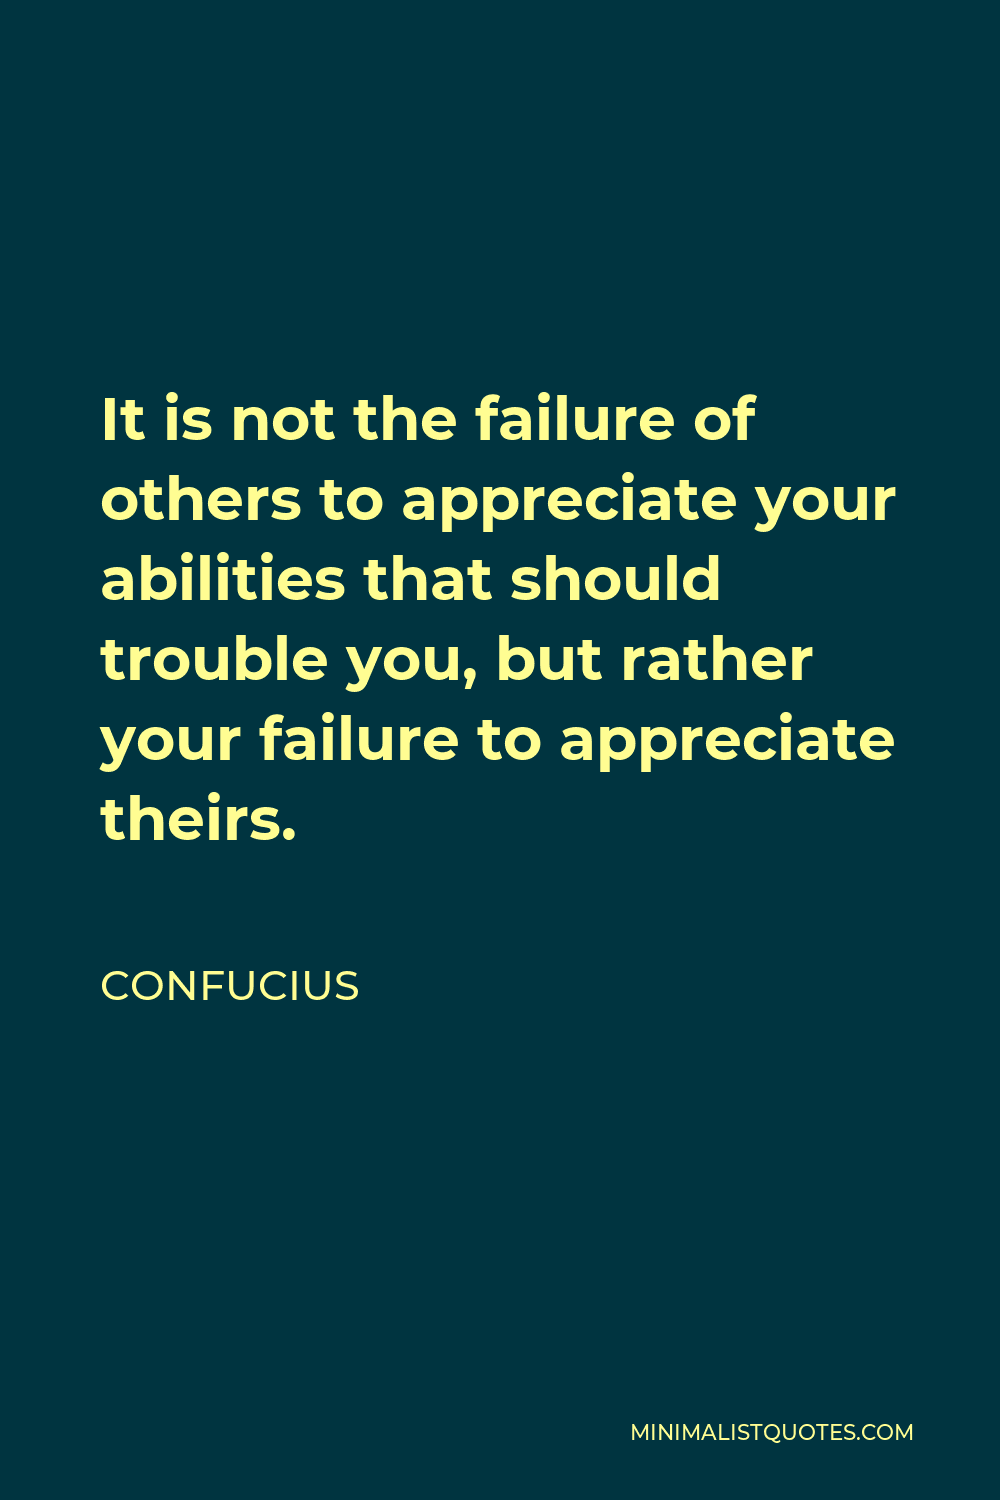 Confucius Quote - It is not the failure of others to appreciate your abilities that should trouble you, but rather your failure to appreciate theirs.